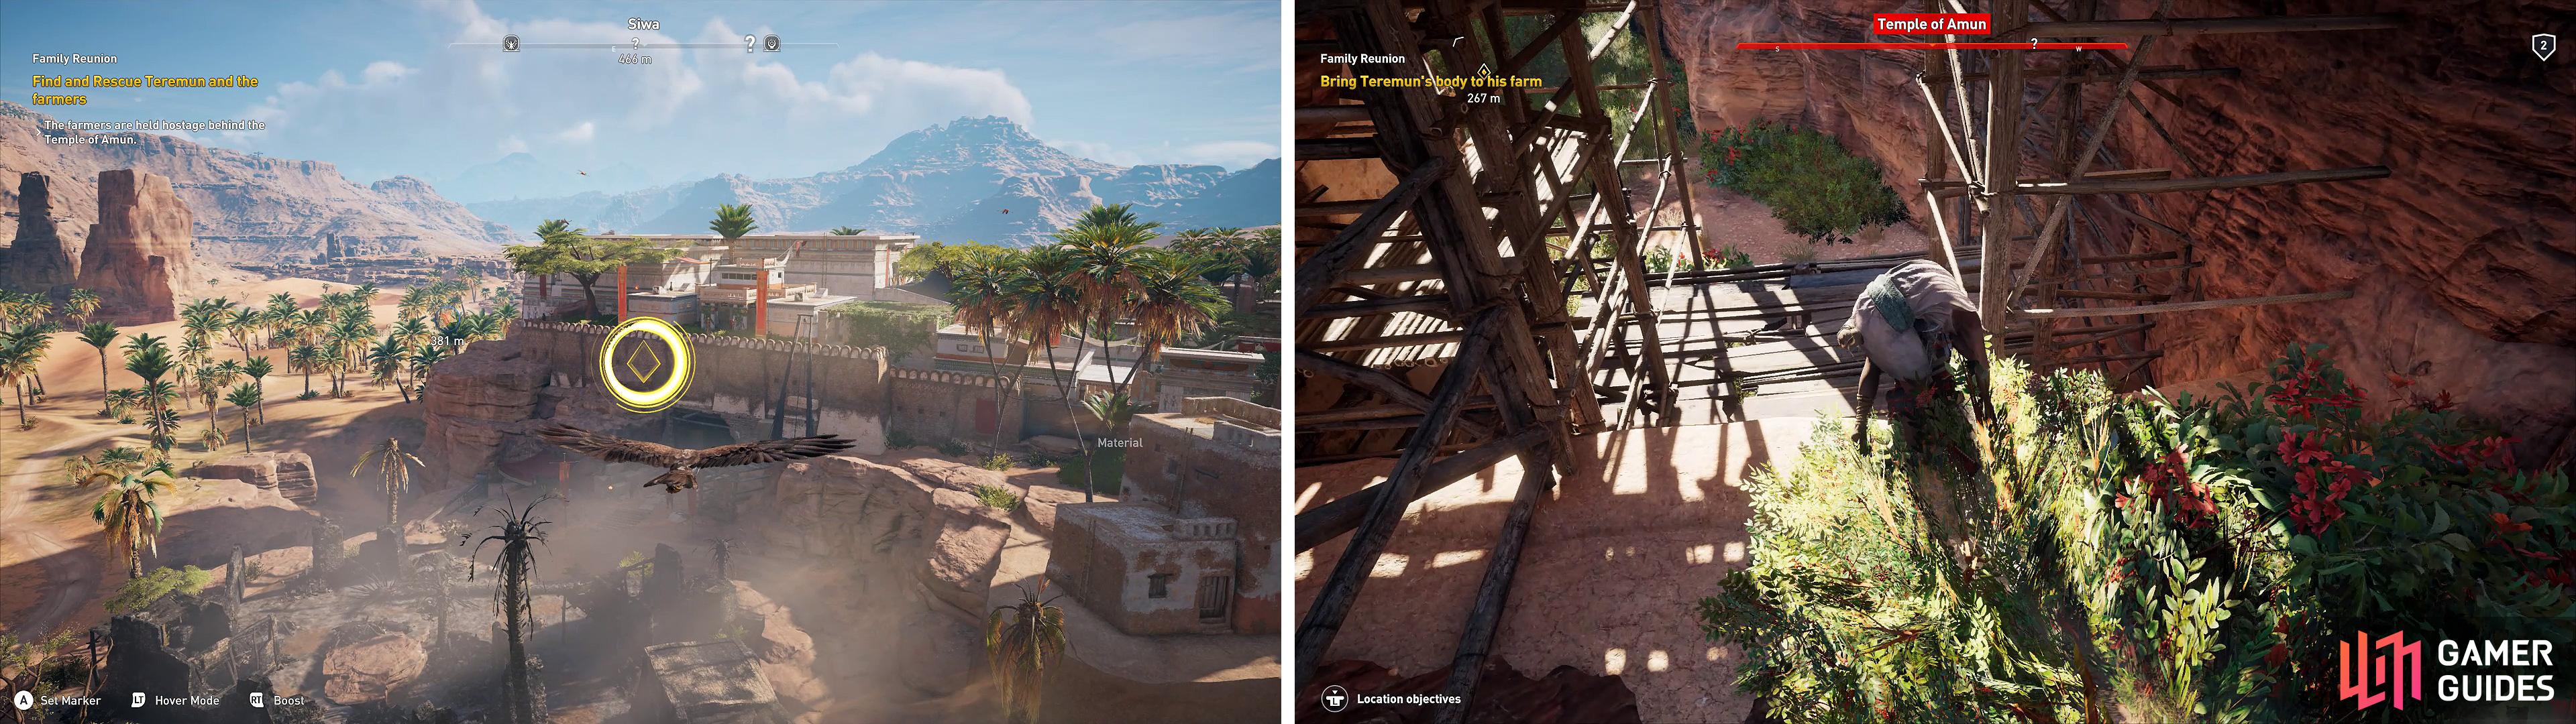 Senu can spot your mission targets by zoning in on them (left). When you find Tenemun, carry him away from the camp (right).